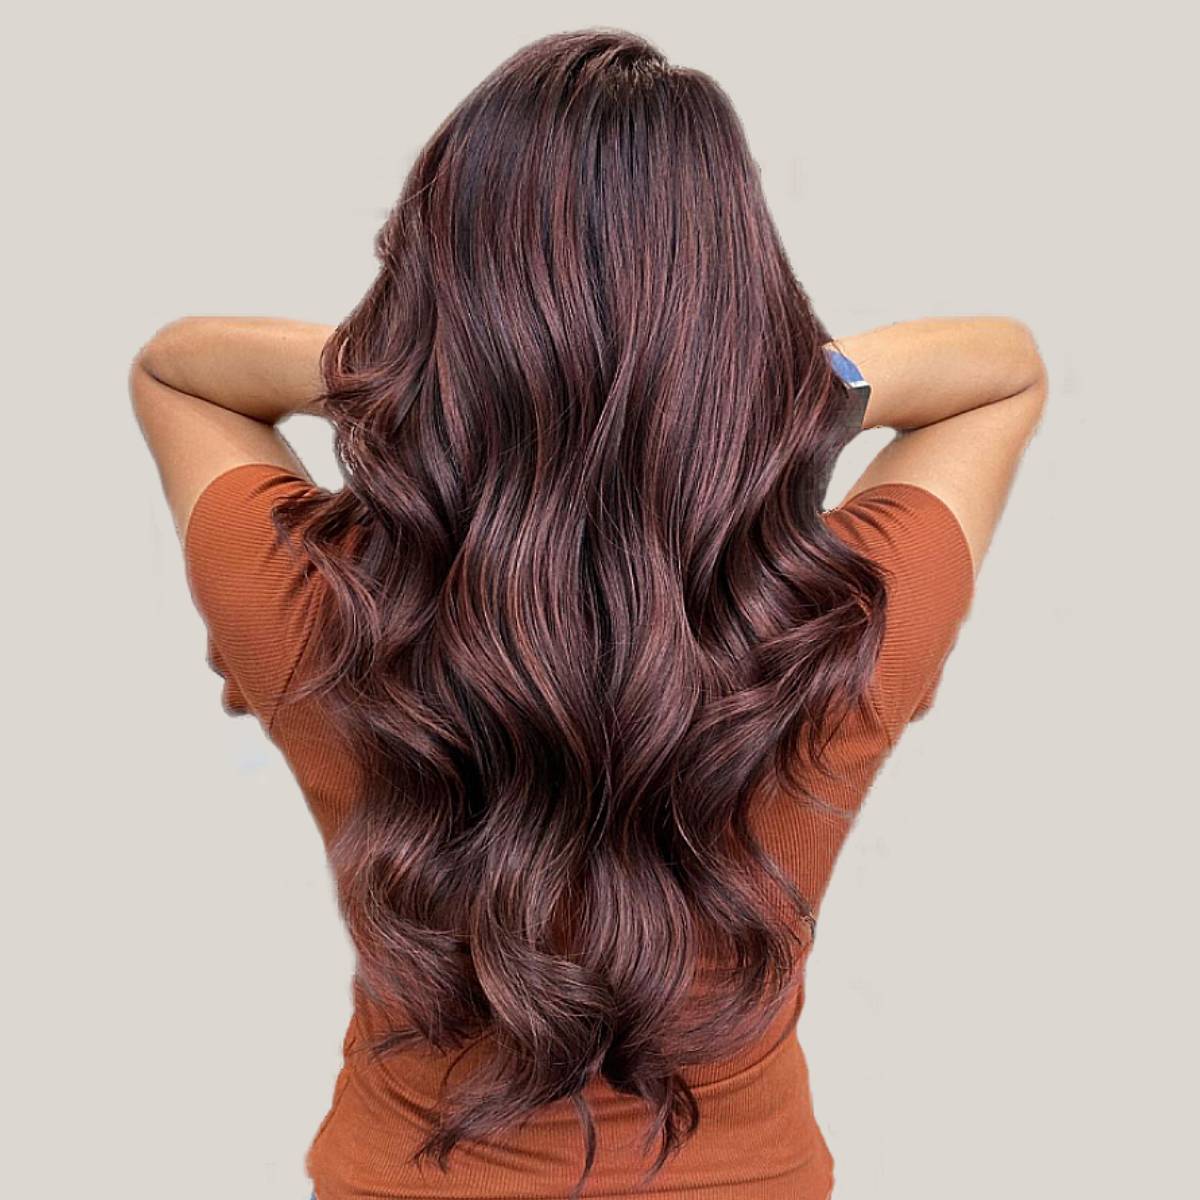 https://content.latest-hairstyles.com/wp-content/uploads/reddish-brown-hair-1x1-1.jpg